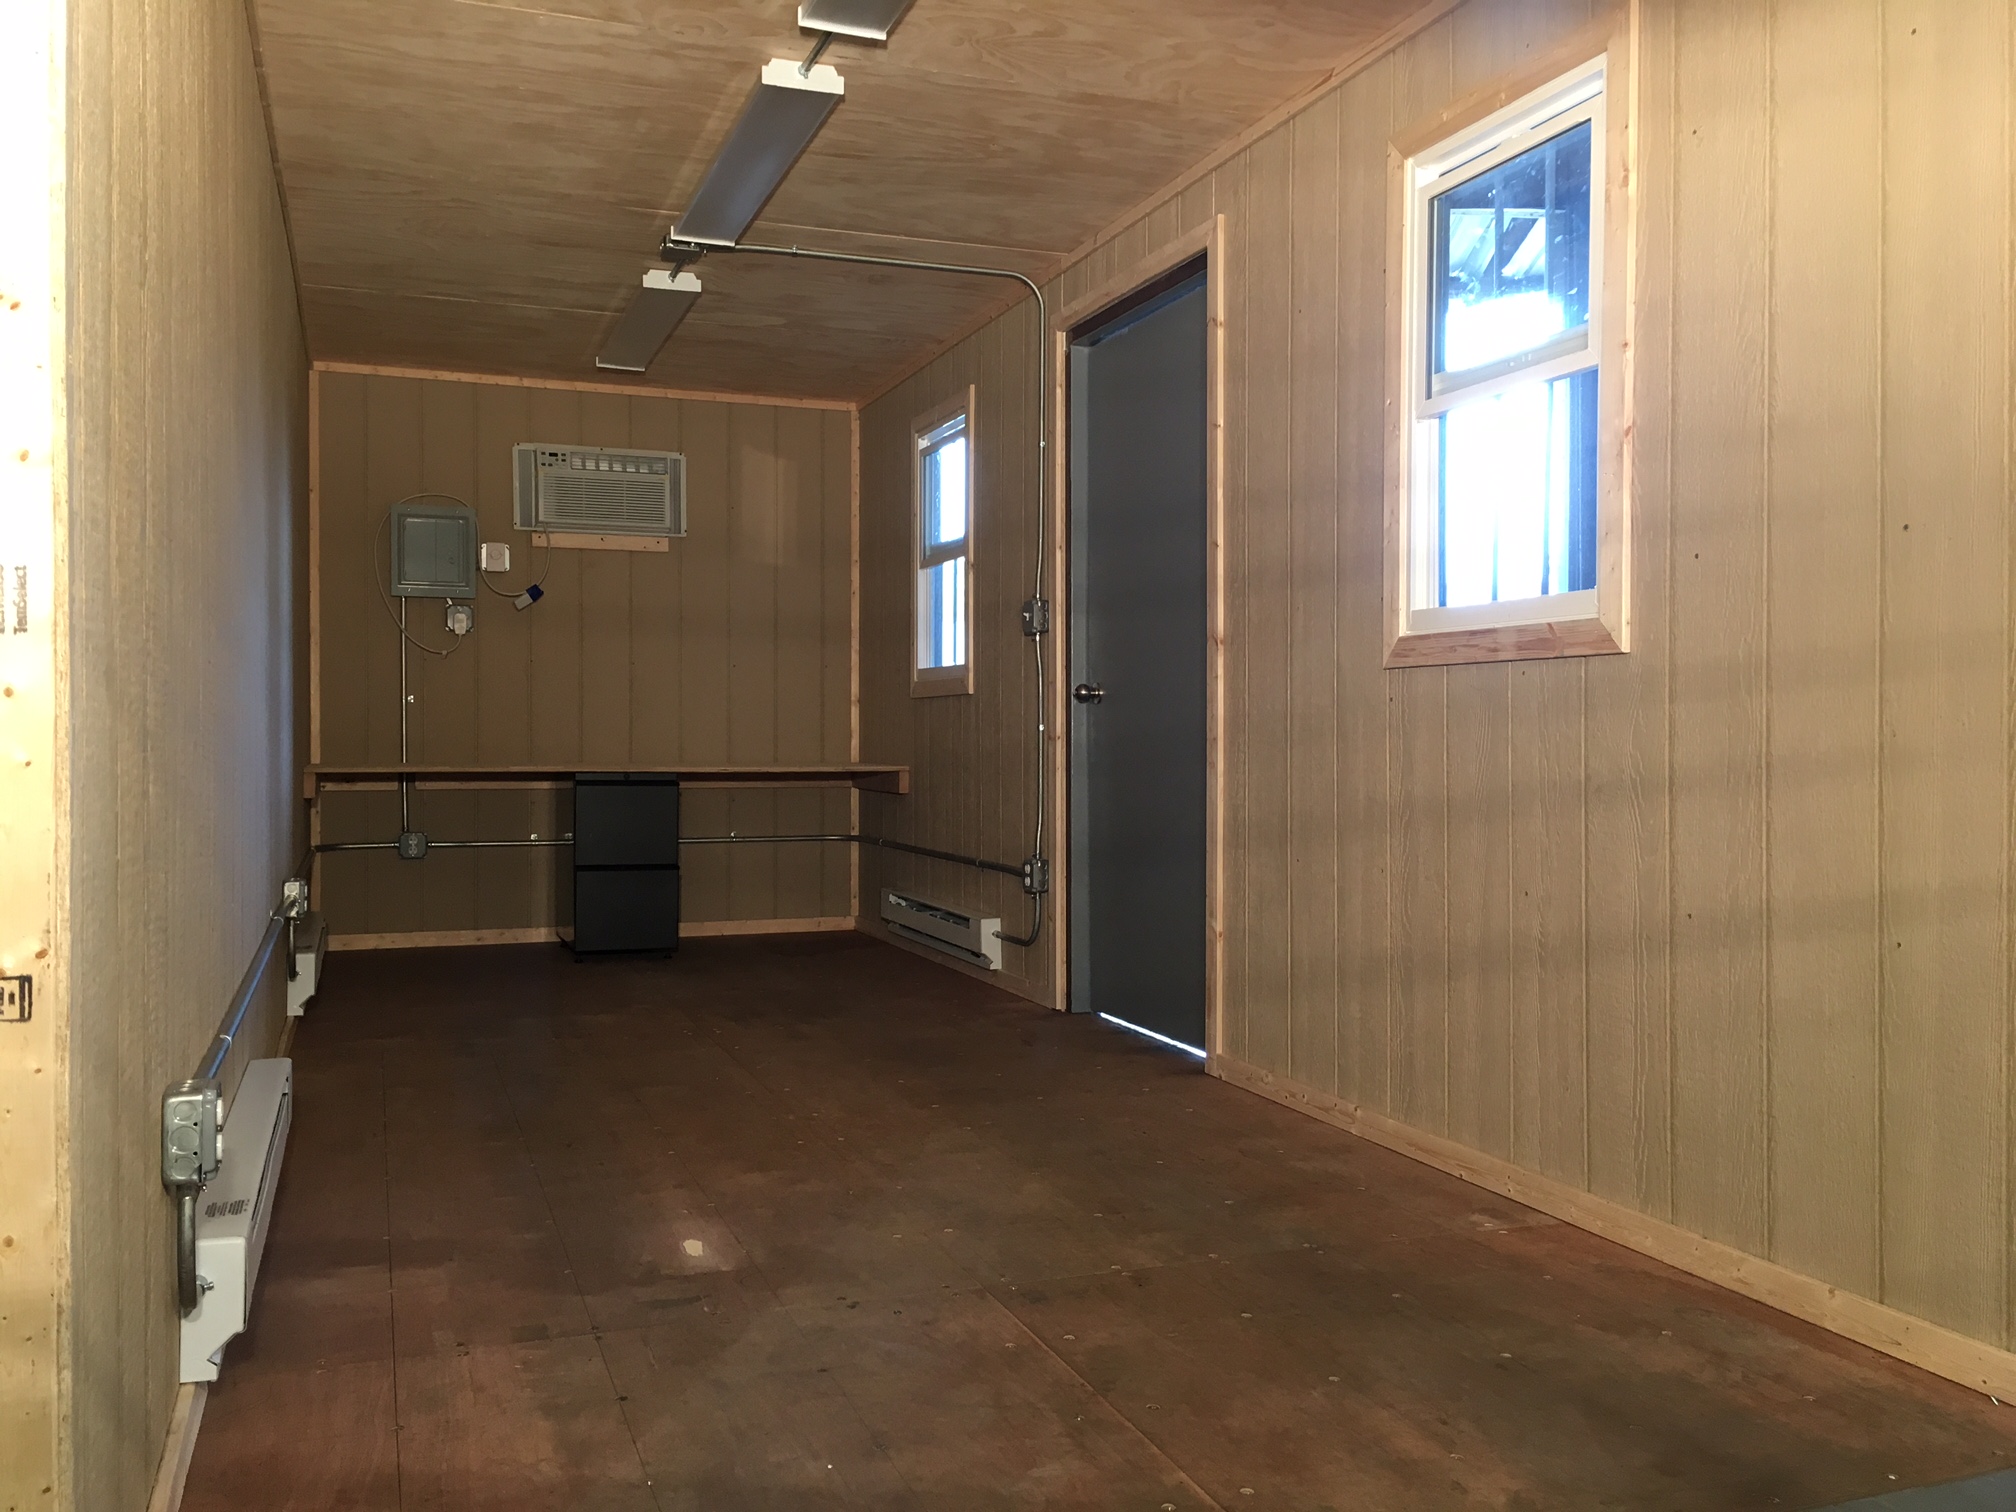 20' mobile shipping container office ext